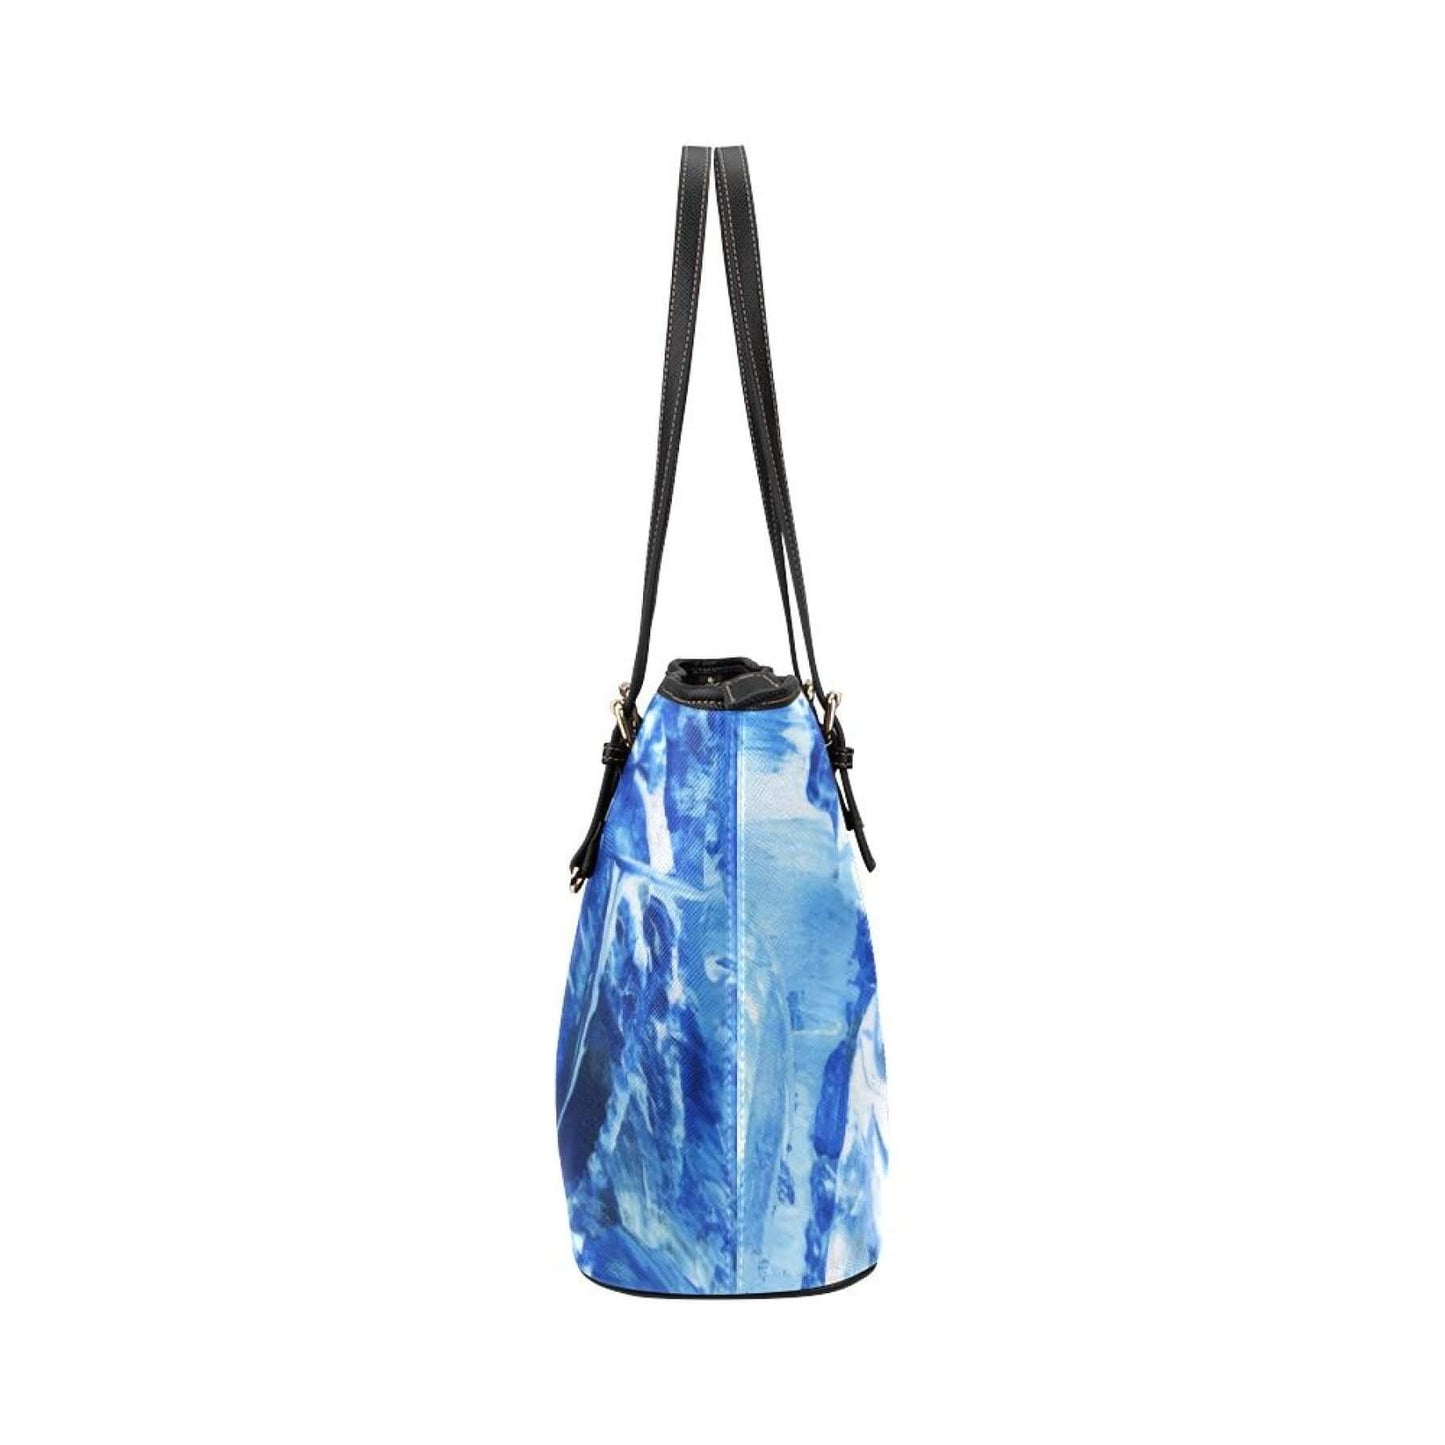 Blue And Black Swirl Pattern Leather Tote